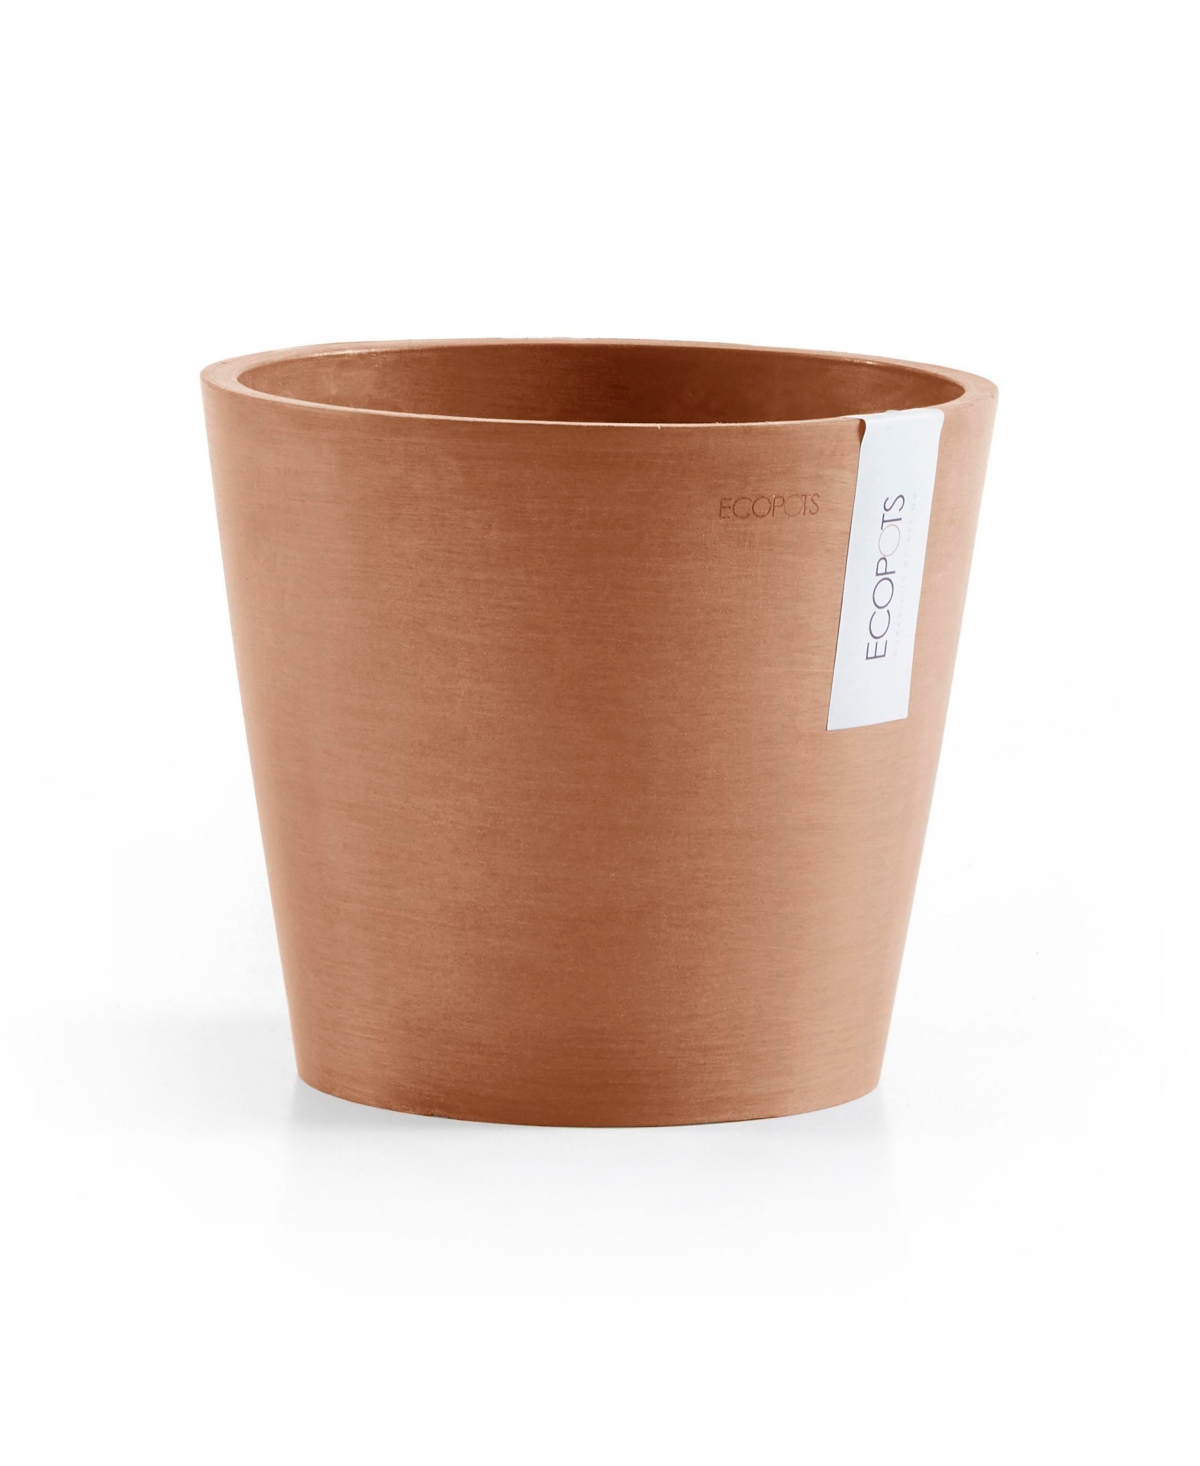 Eco pots Amsterdam Modern Round Indoor and Outdoor Planter, 3in - Taupe